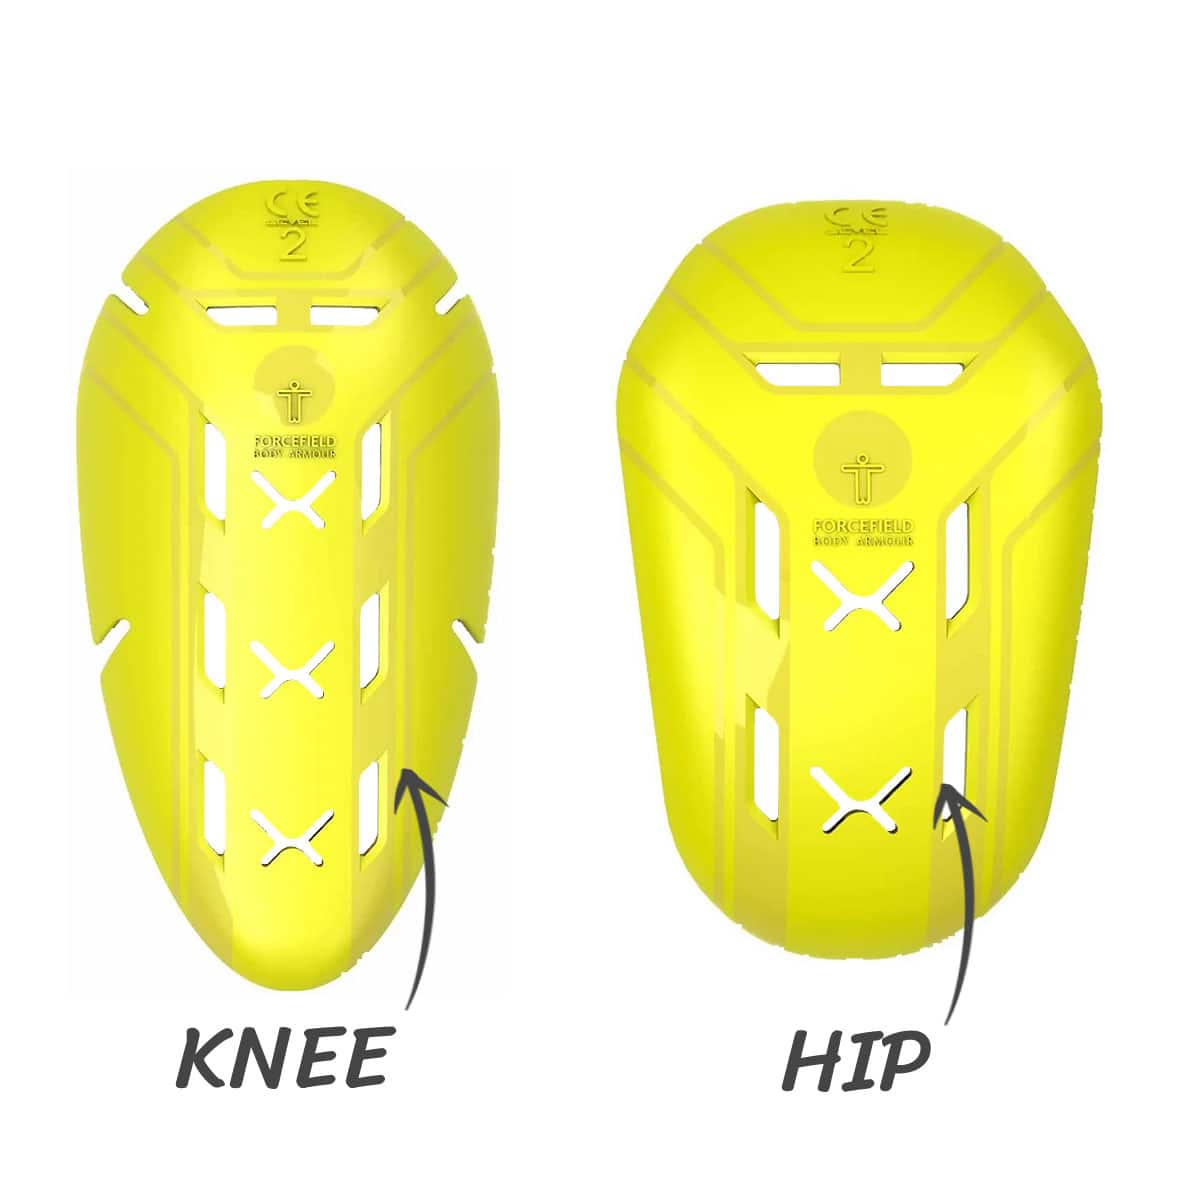 Forcefield Isolator 2 motorcycle knee, hip protectors: Replace bulky armour inserts with a slimline CE Level 2 protector